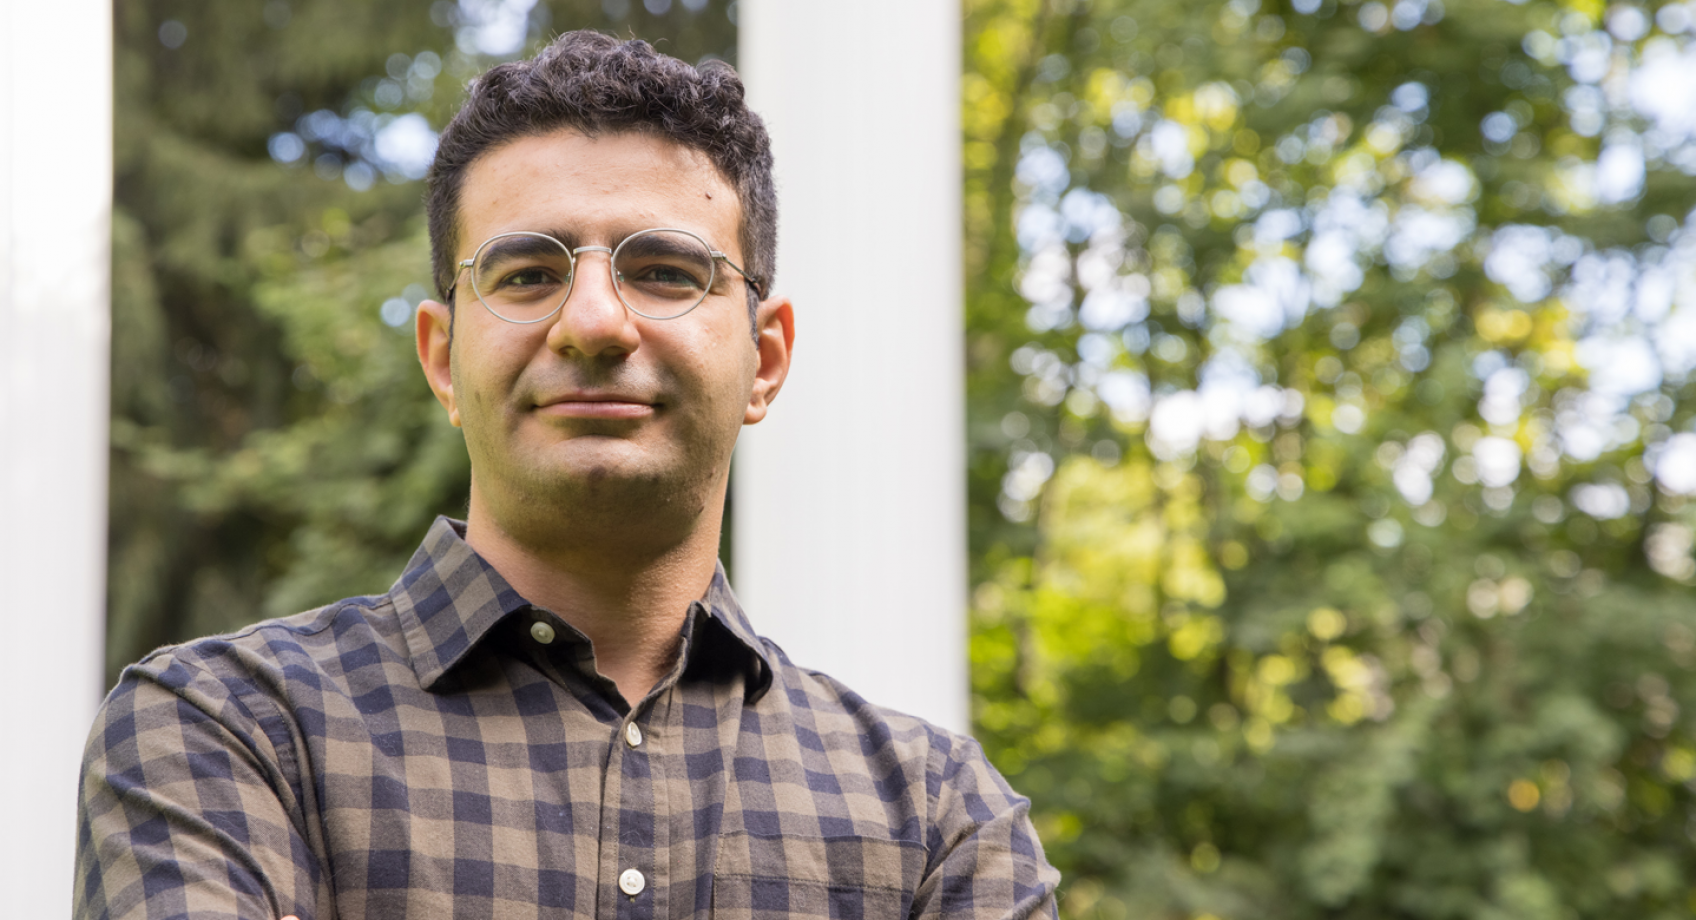 Sajjad Moazeni receives NSF CAREER award to help make the next generation of AI supercomputers faster, more powerful and energy efficient Banner